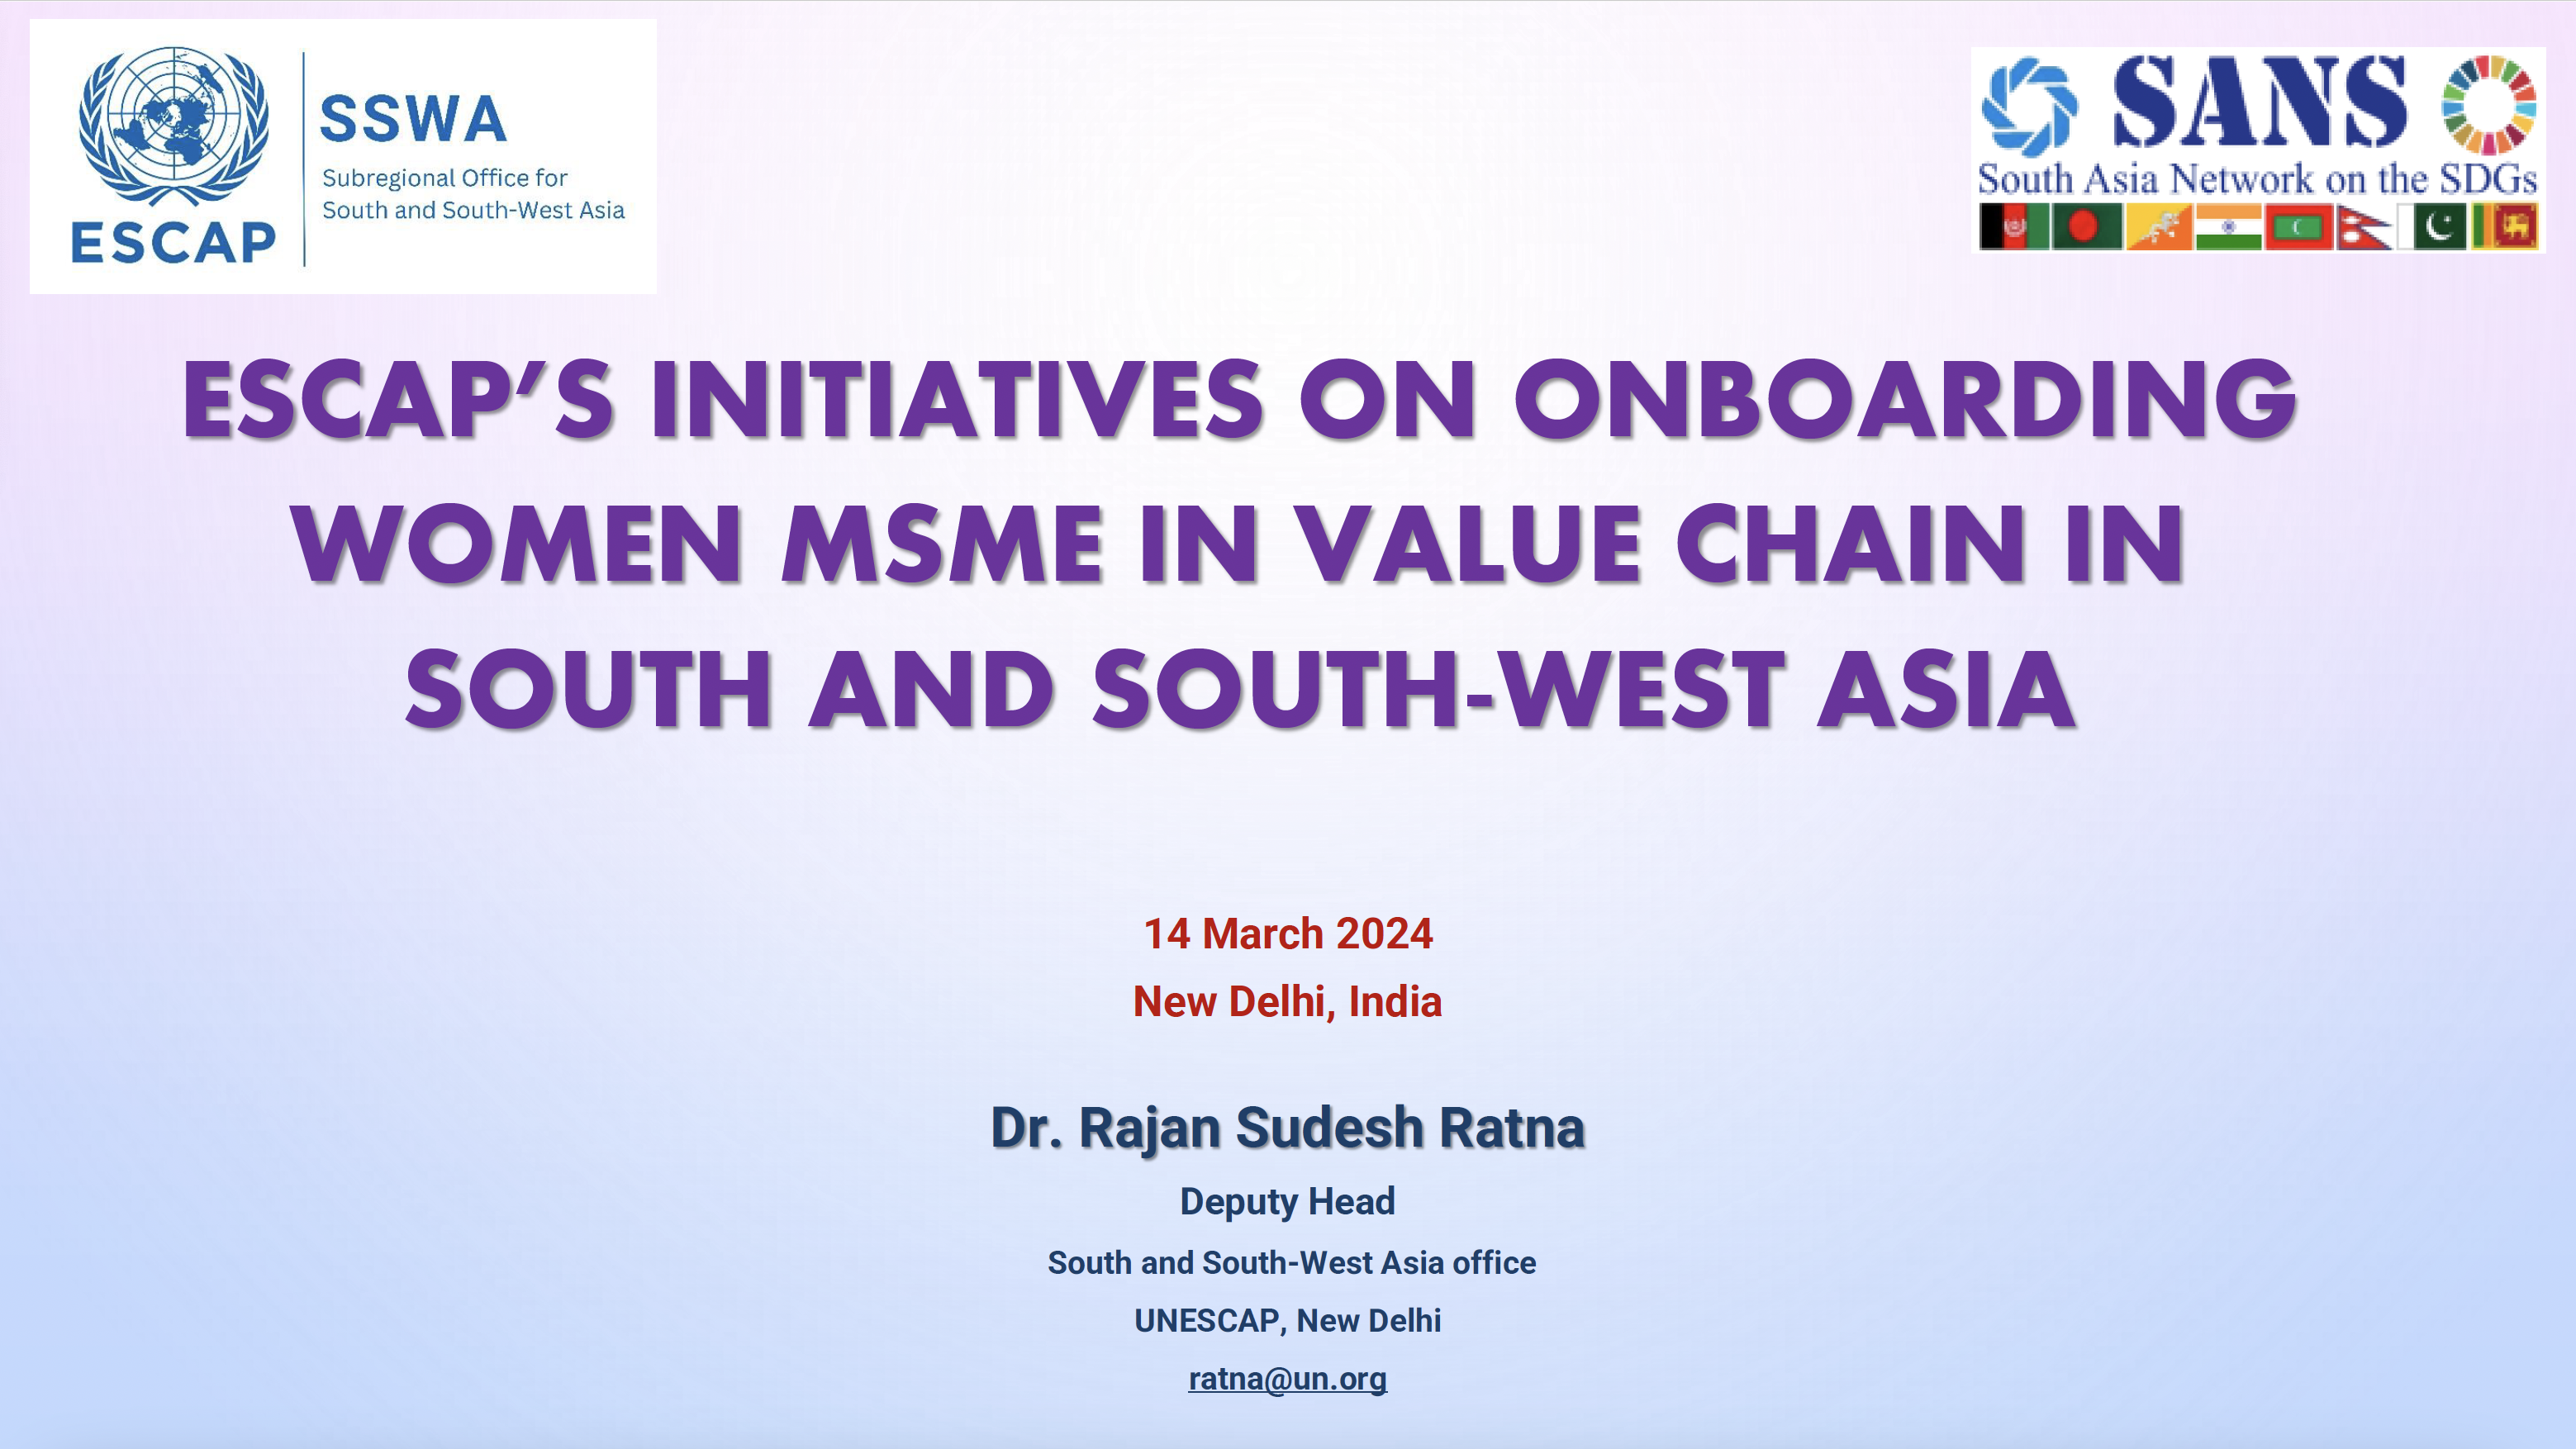 Dr. Rajan Sudesh Ratna, Deputy Head and Senior Economic Affairs Officer, UN-ESCAP South and South-West Asia Office, on ‘ESCAP initiatives on onboarding women MSMEs in value chain’